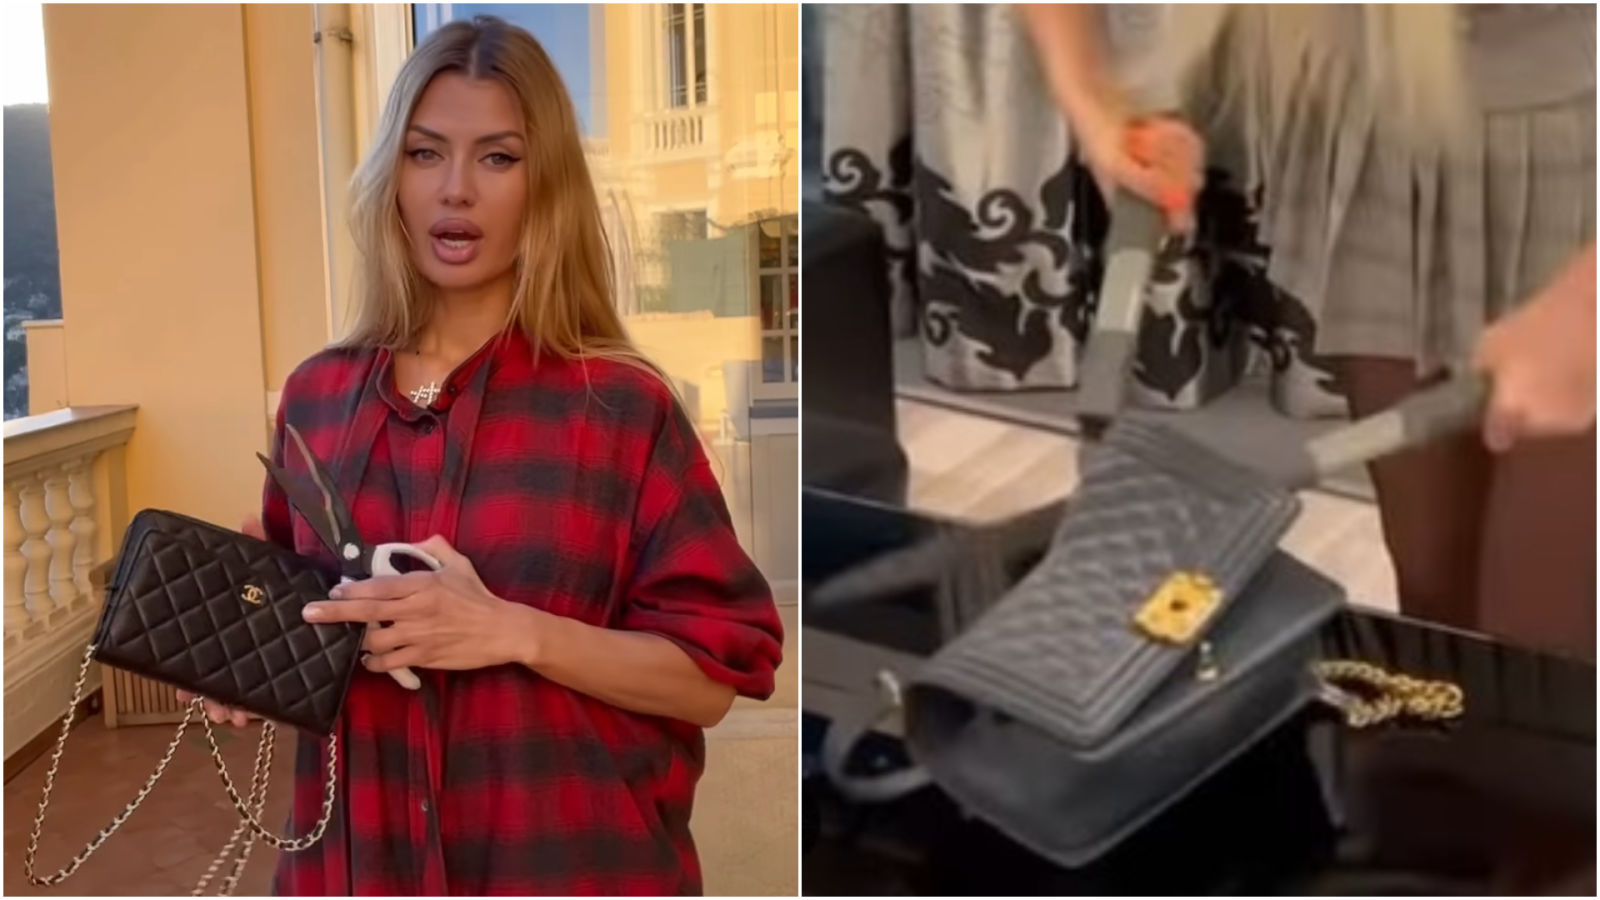 Russian influencers are cutting up their Chanel handbags in protest over  'Russiaphobia